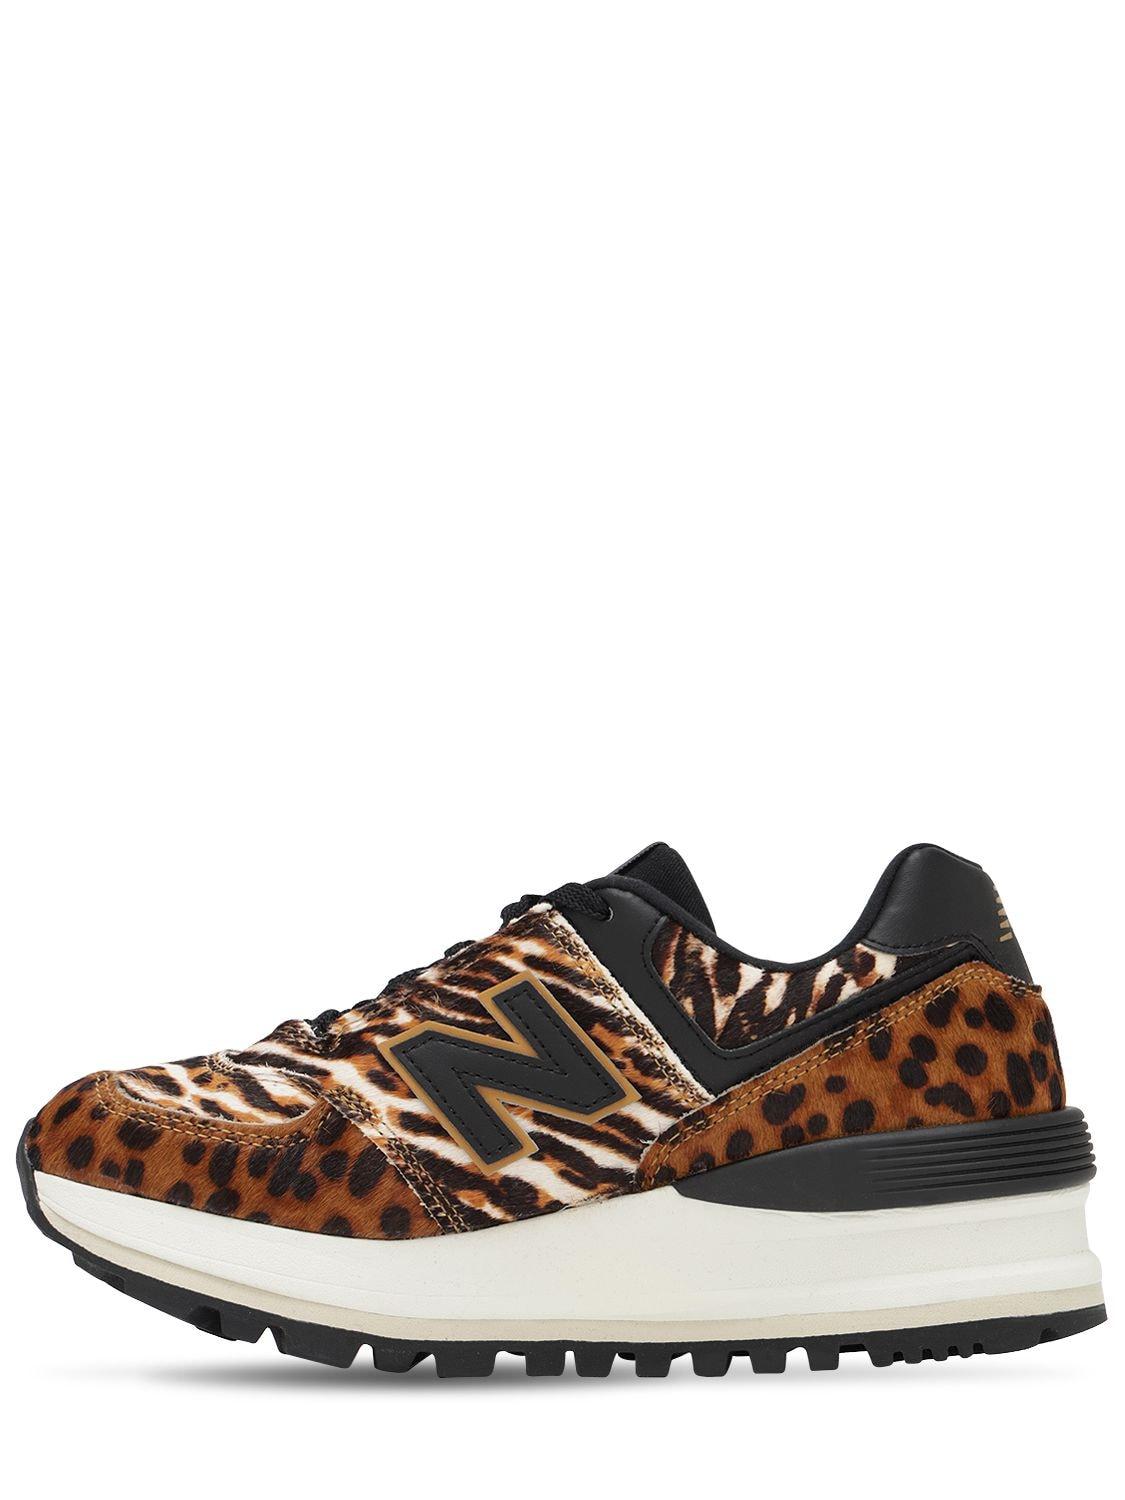 New Balance 574 Wedge in Brown | Lyst